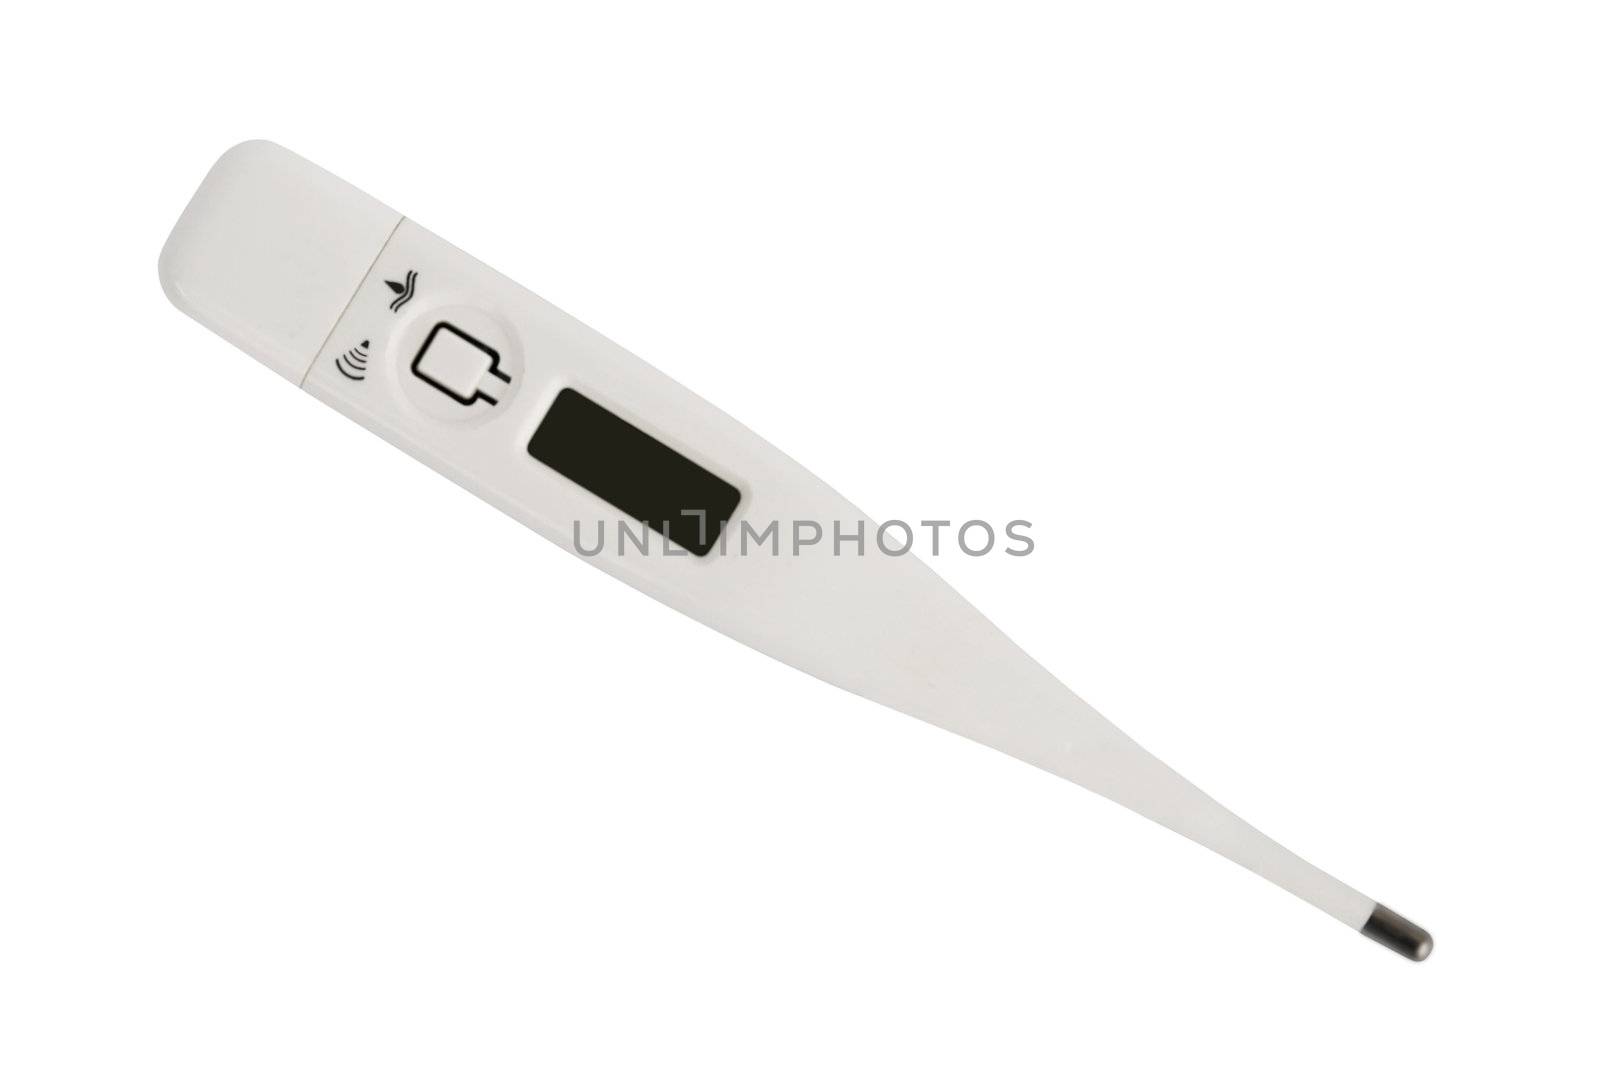 This image shows a macro from a acoustic clinical thermometer